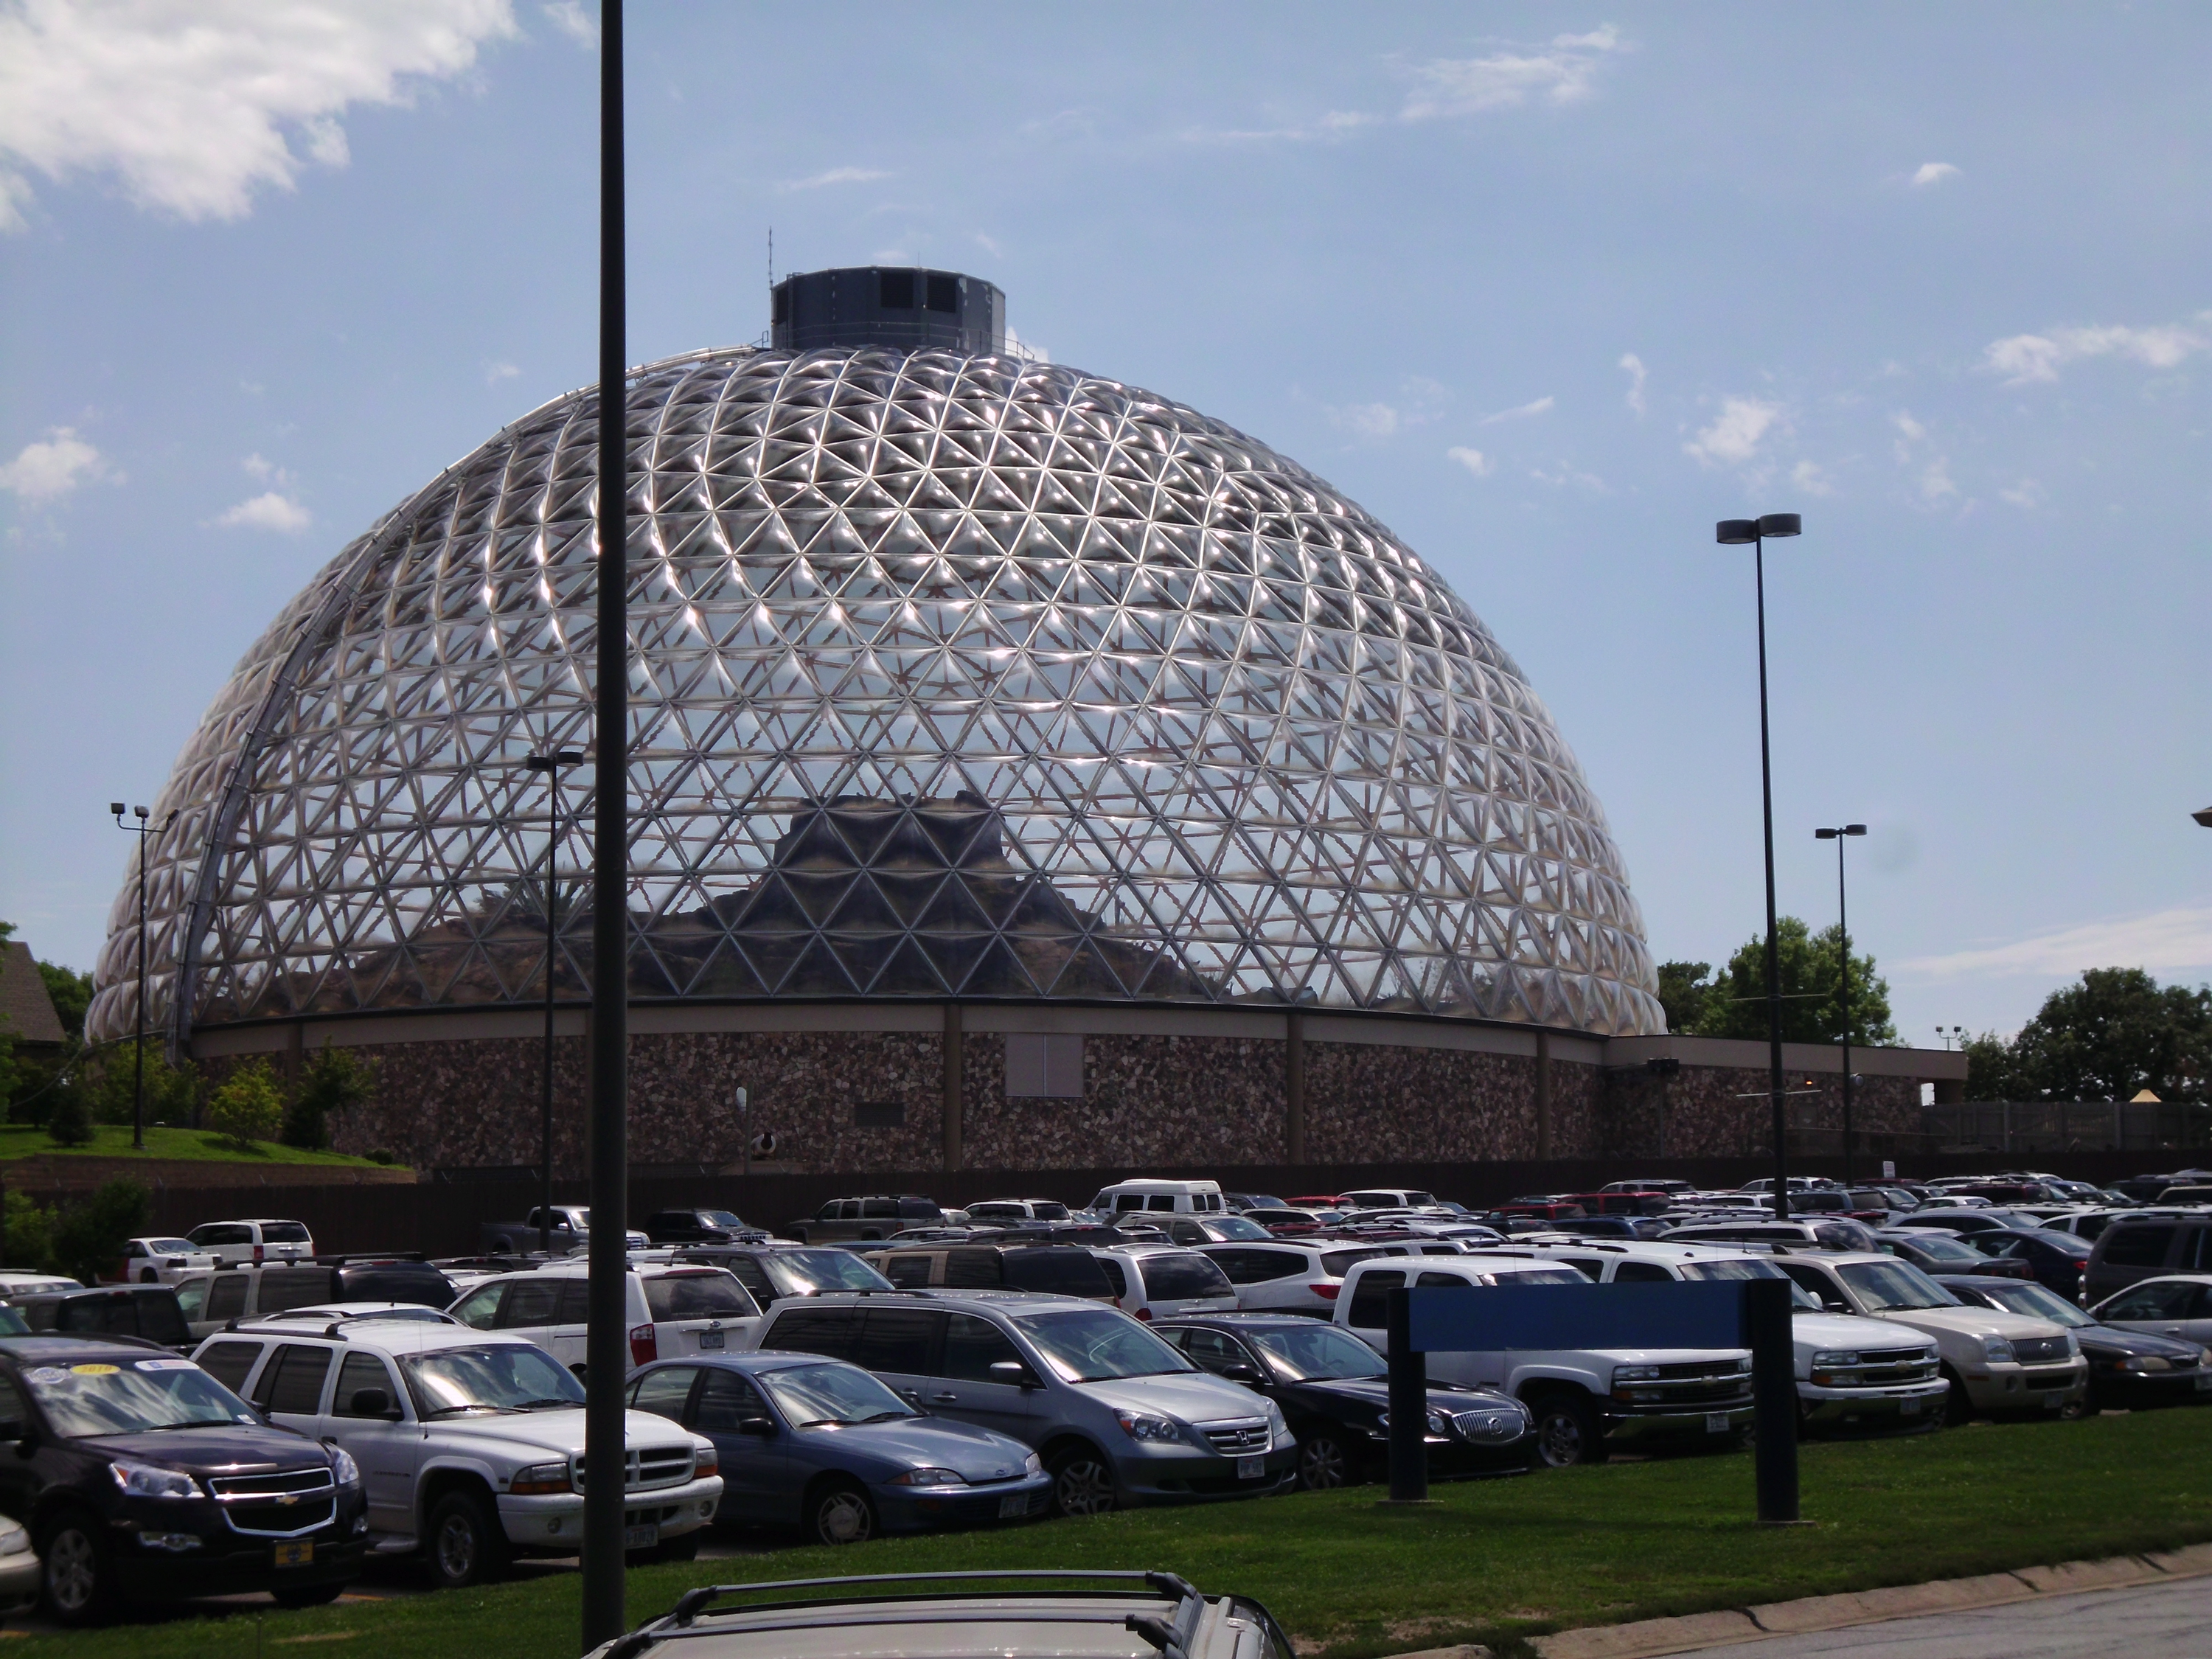 The Henry Doorly Zoo and its famous geodesic dome – the best zoo in the US By Dual Freq - Own work, CC BY 3.0 